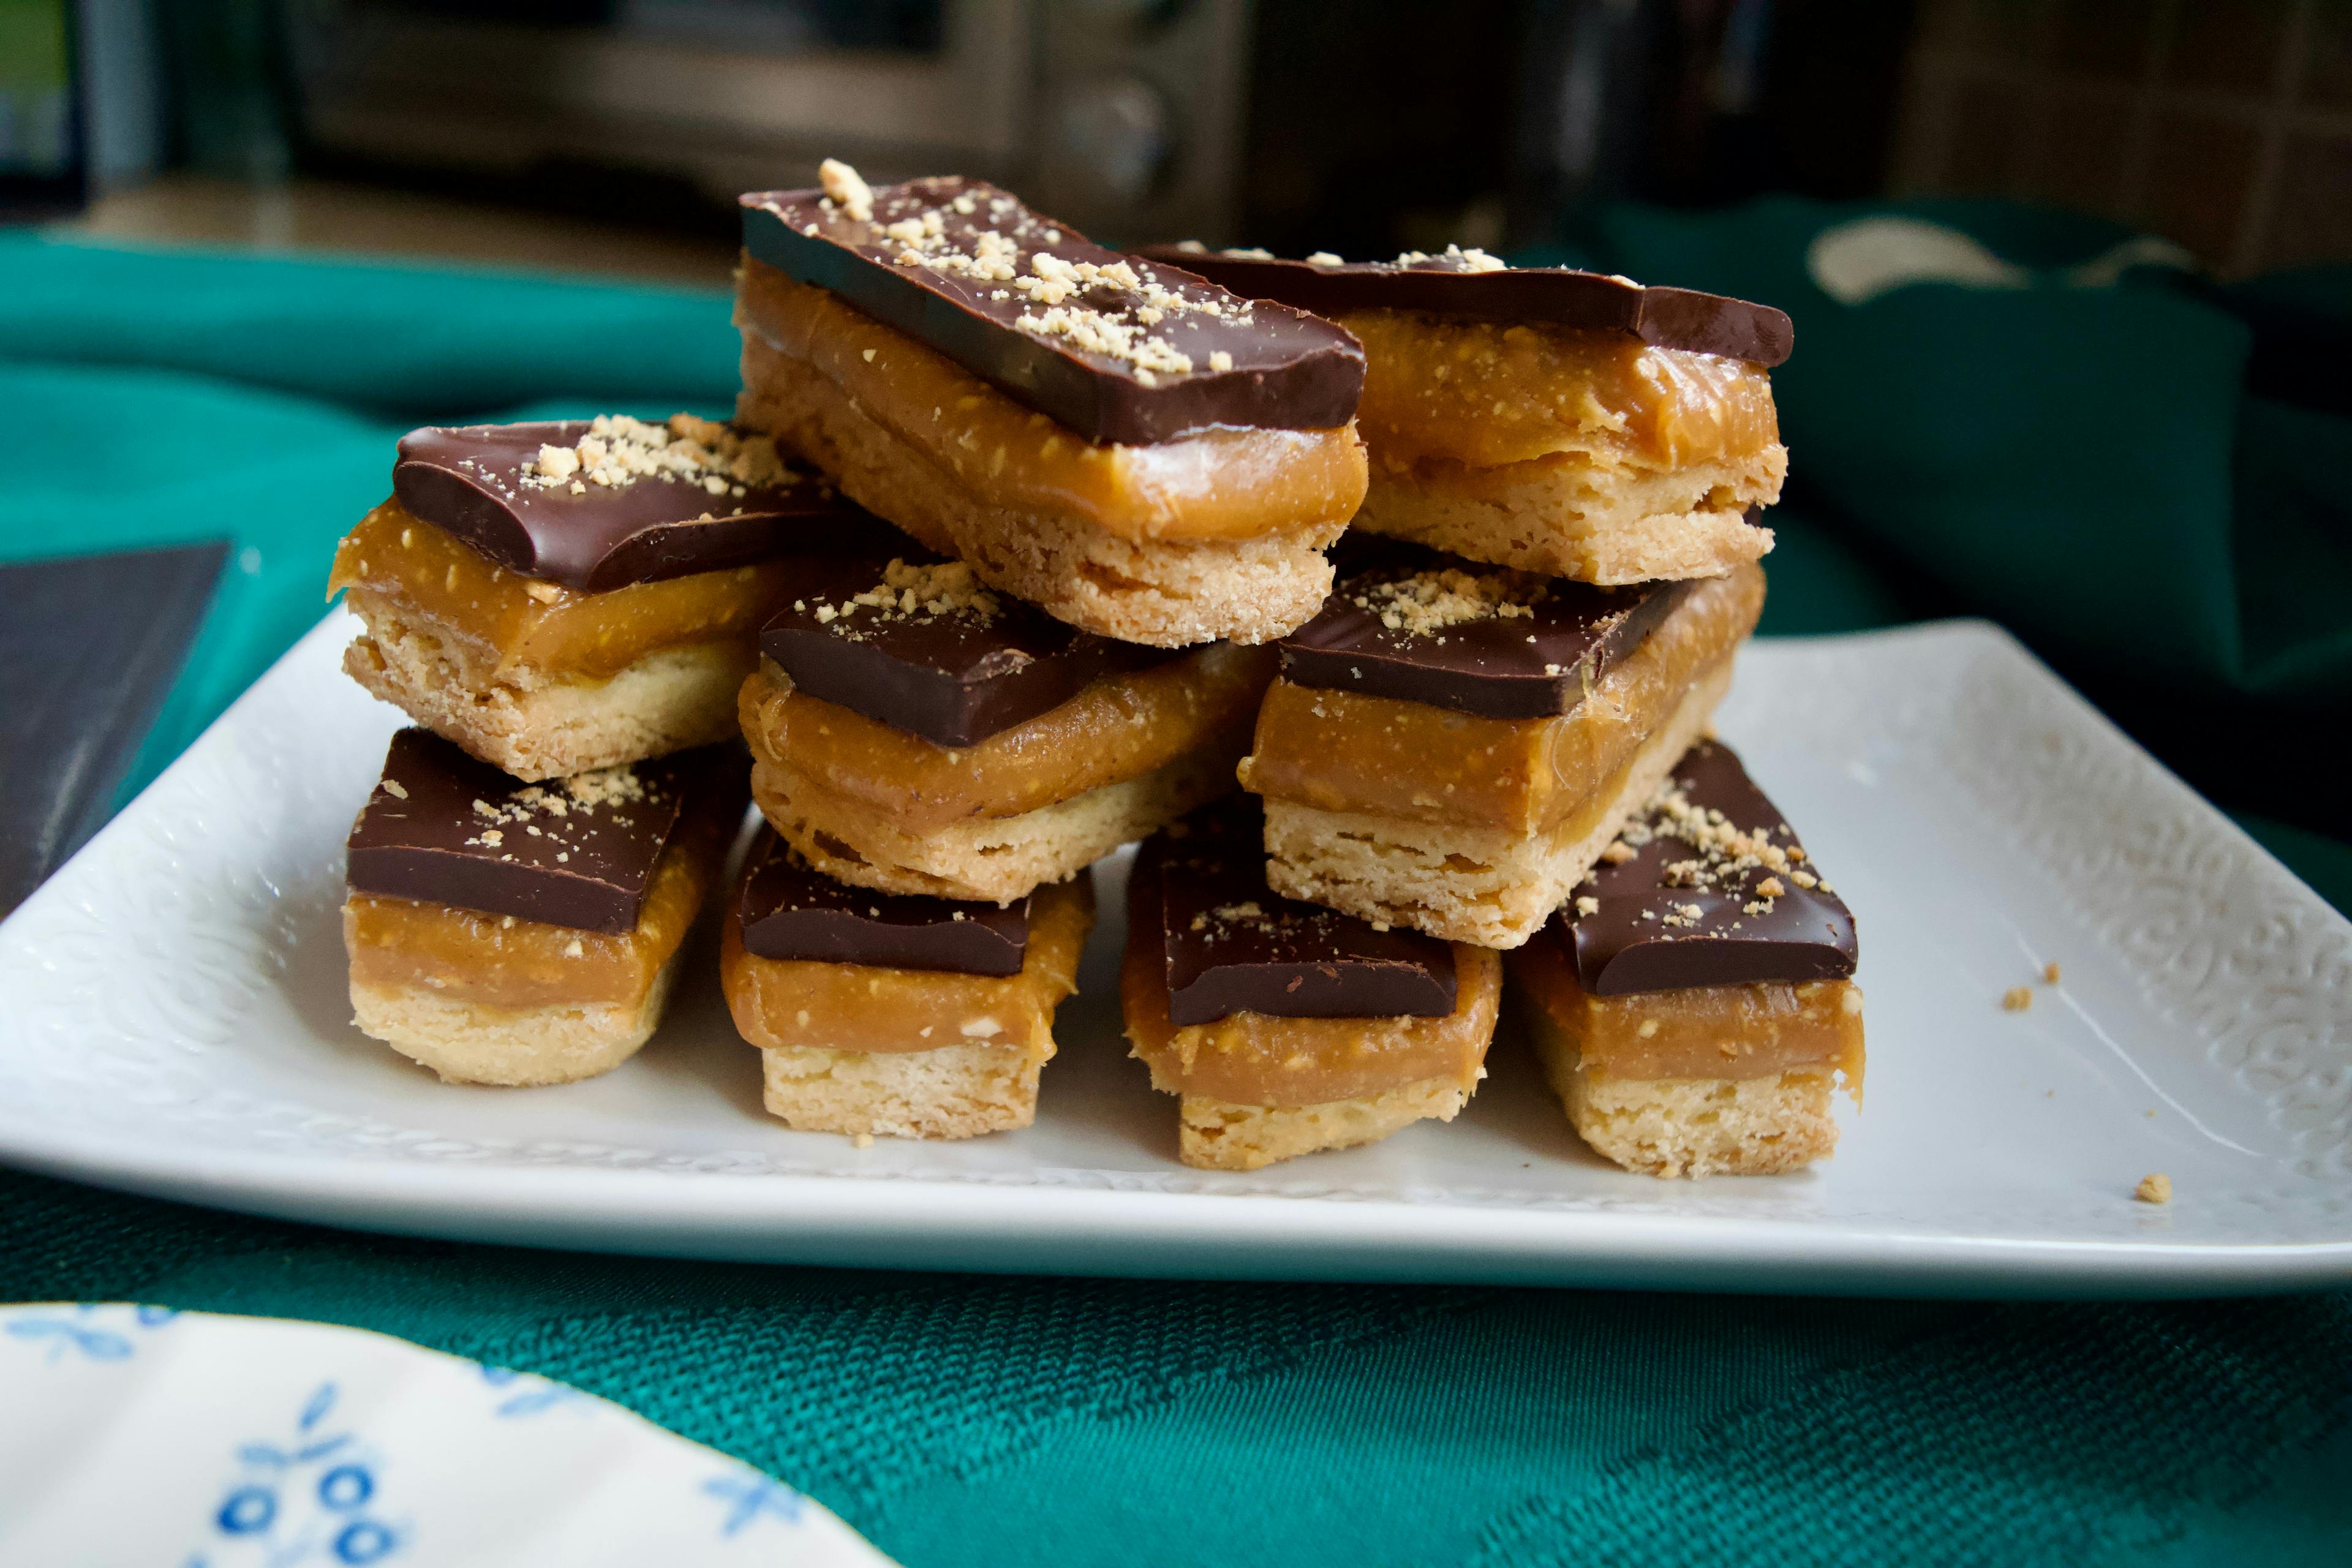 A plate of layered millionaire shortbreads